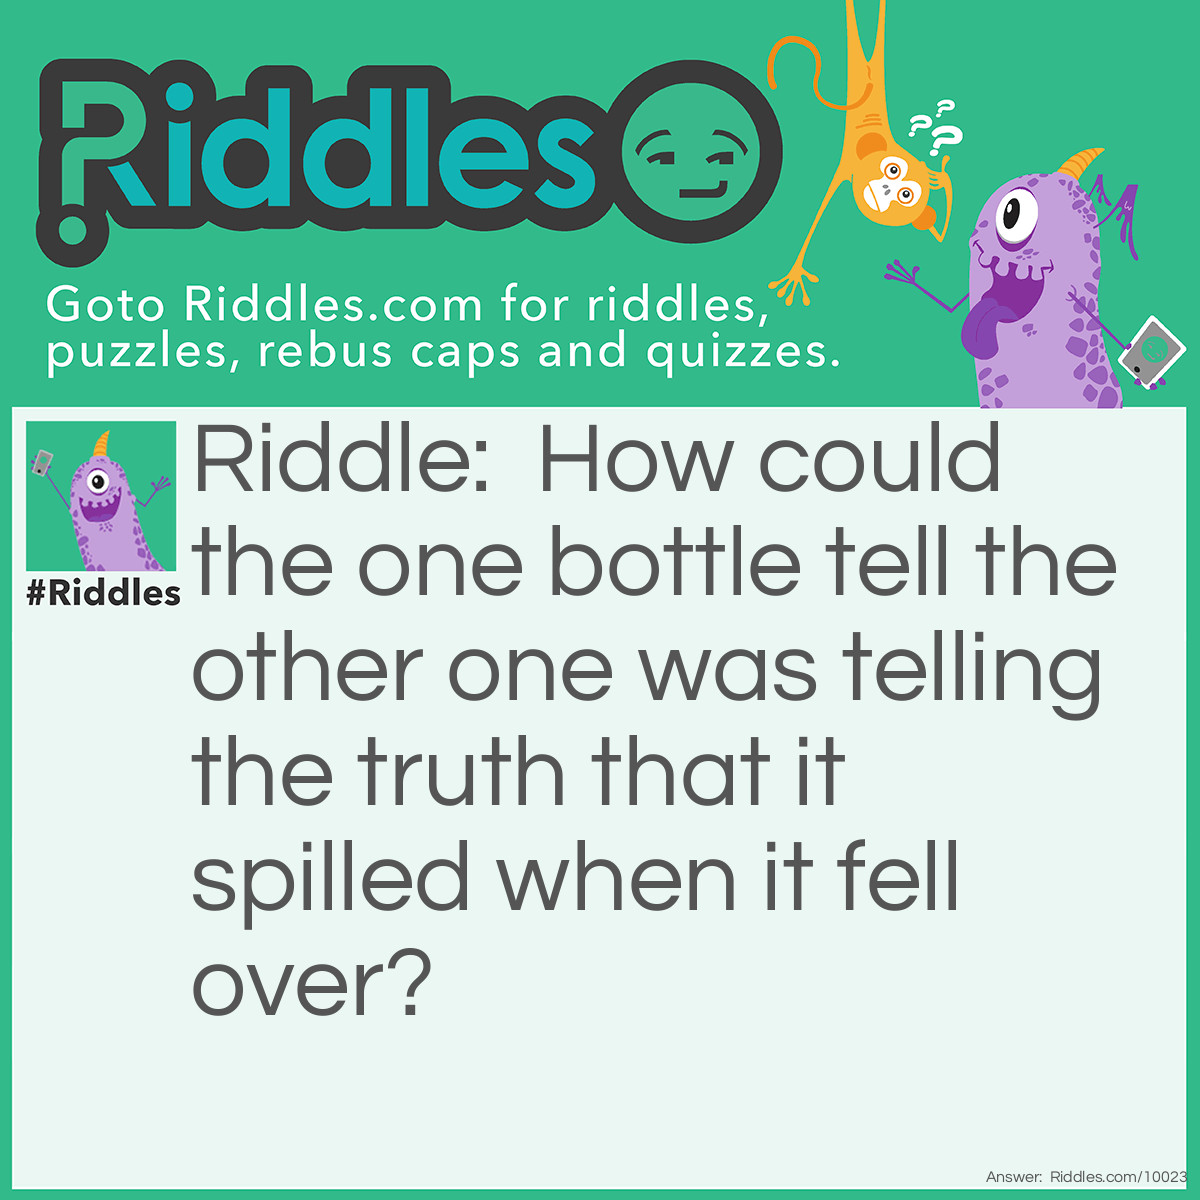 Riddle: How could the one bottle tell the other one was telling the truth that it spilled when it fell over? Answer: No cap.